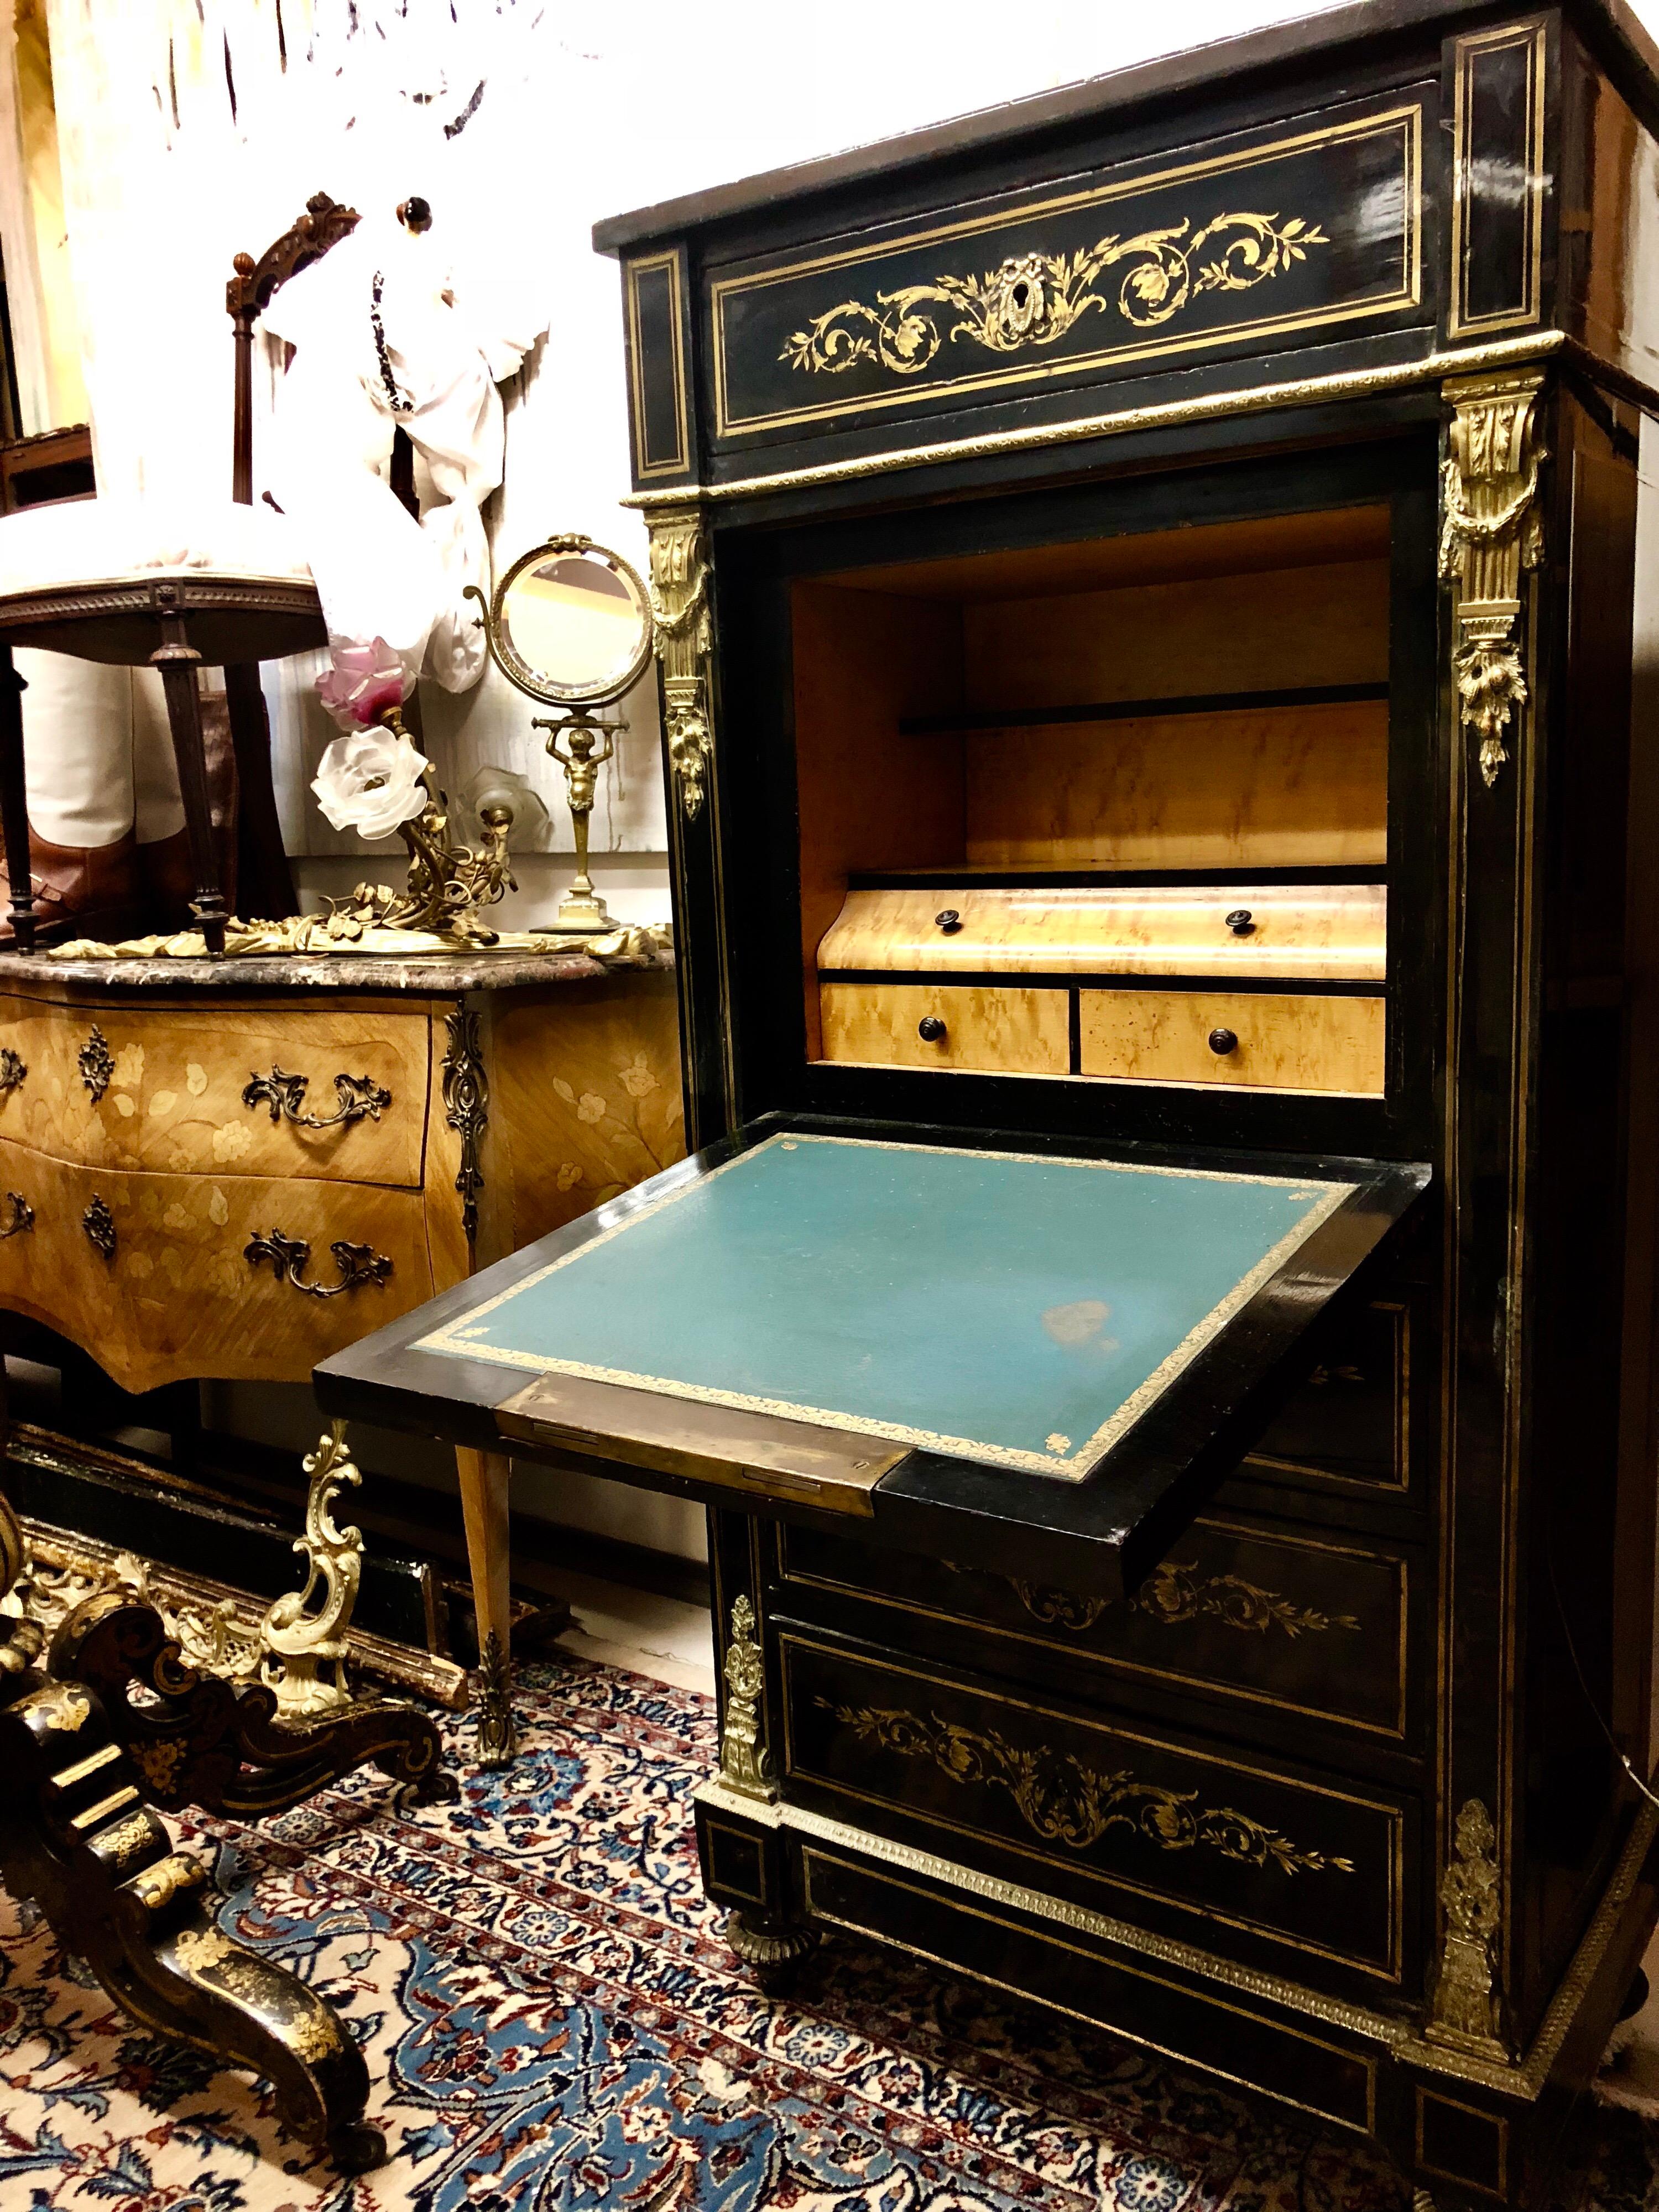 19th Century French Marble-Top Secretaire in Blackened Wood Napoleon III Period For Sale 1